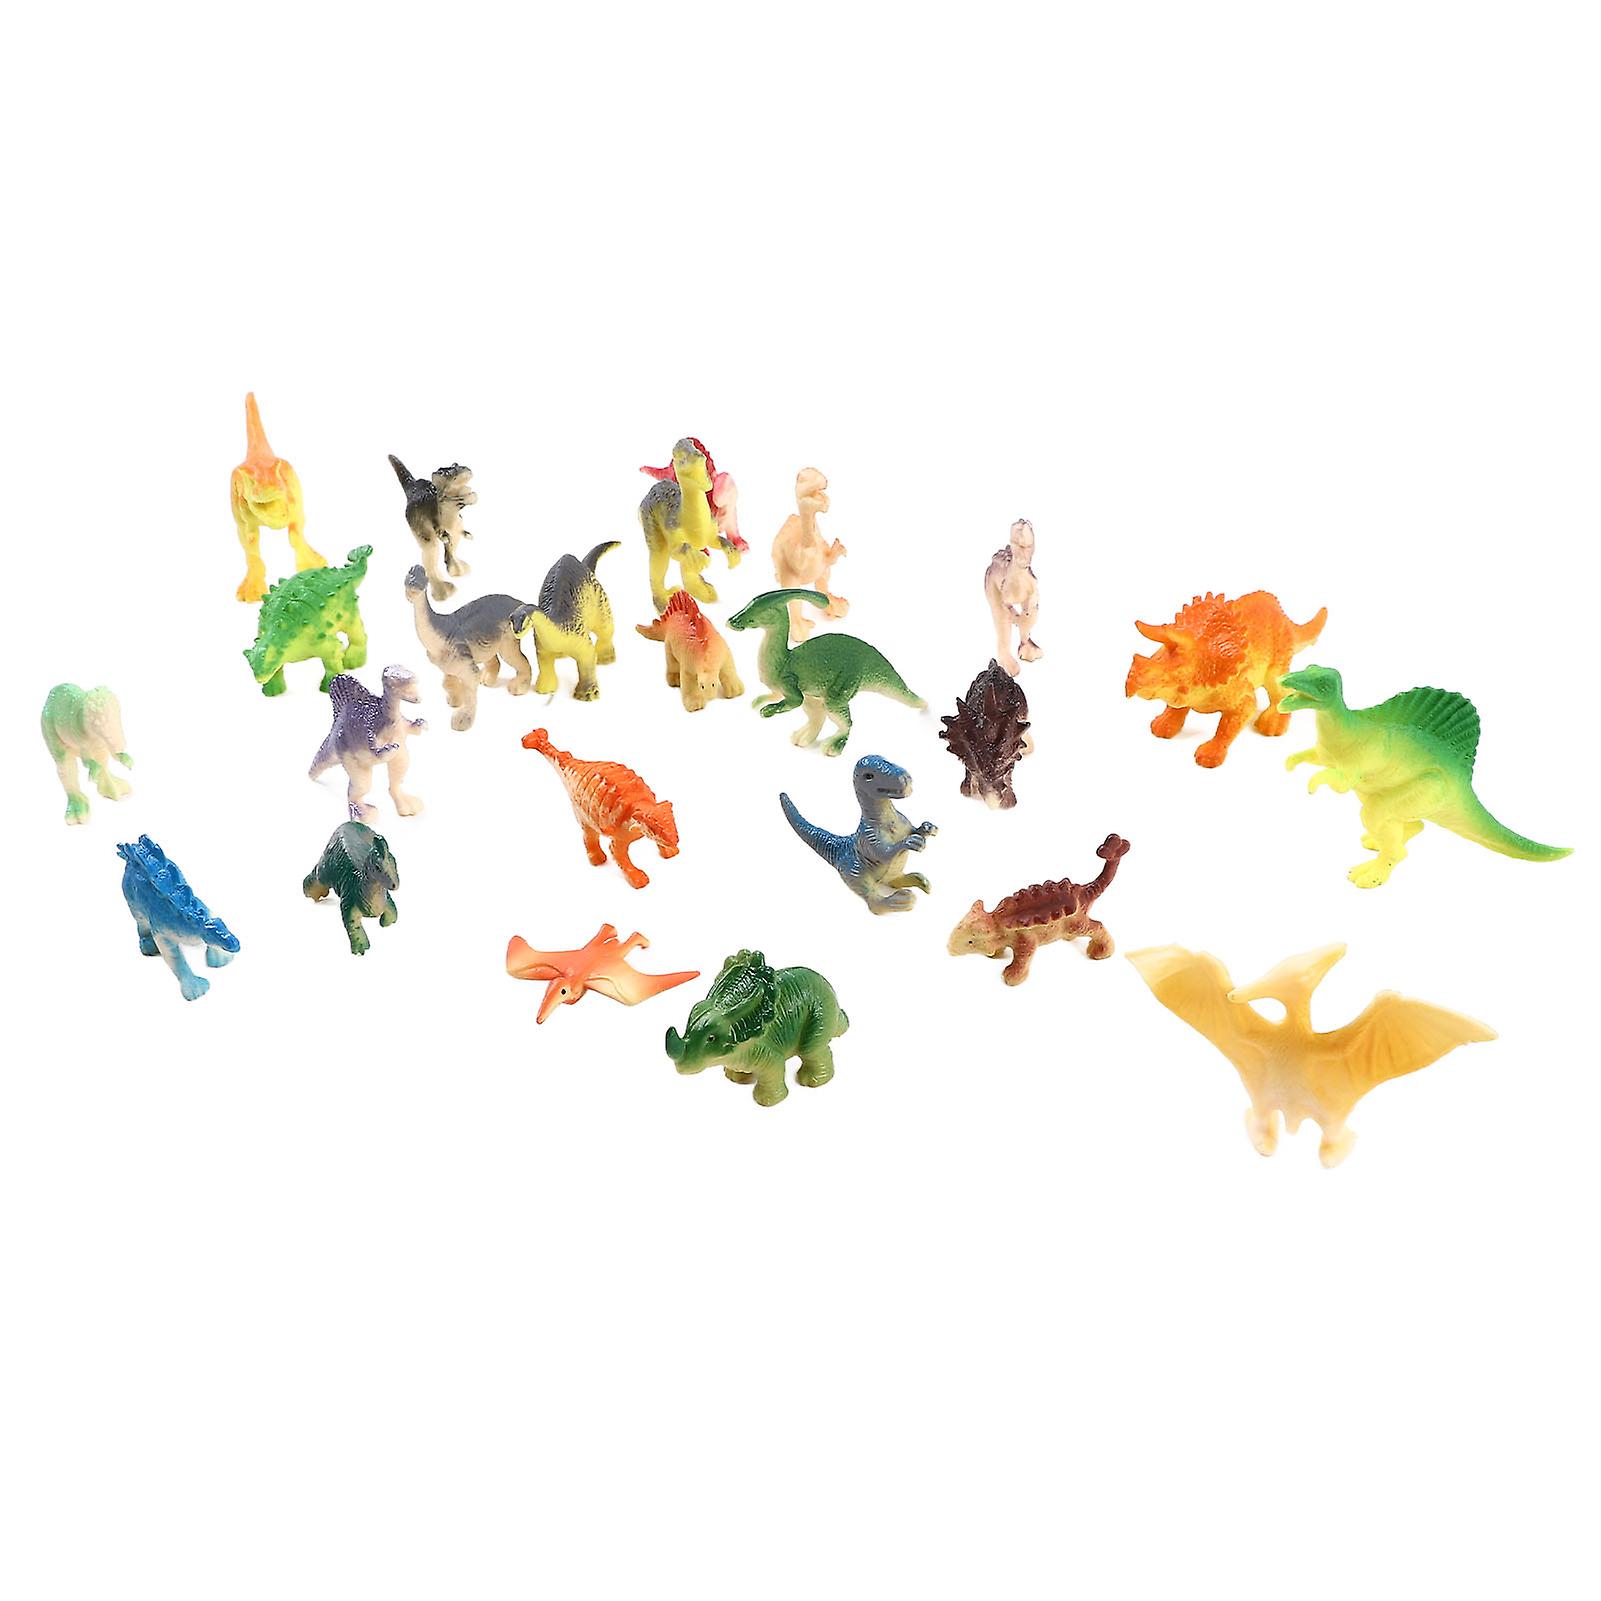 24 Pcs Dinosaur Figurines Real Details Plastic Interactive Play Set Of Dinosaur Toys For Toddlers Kids